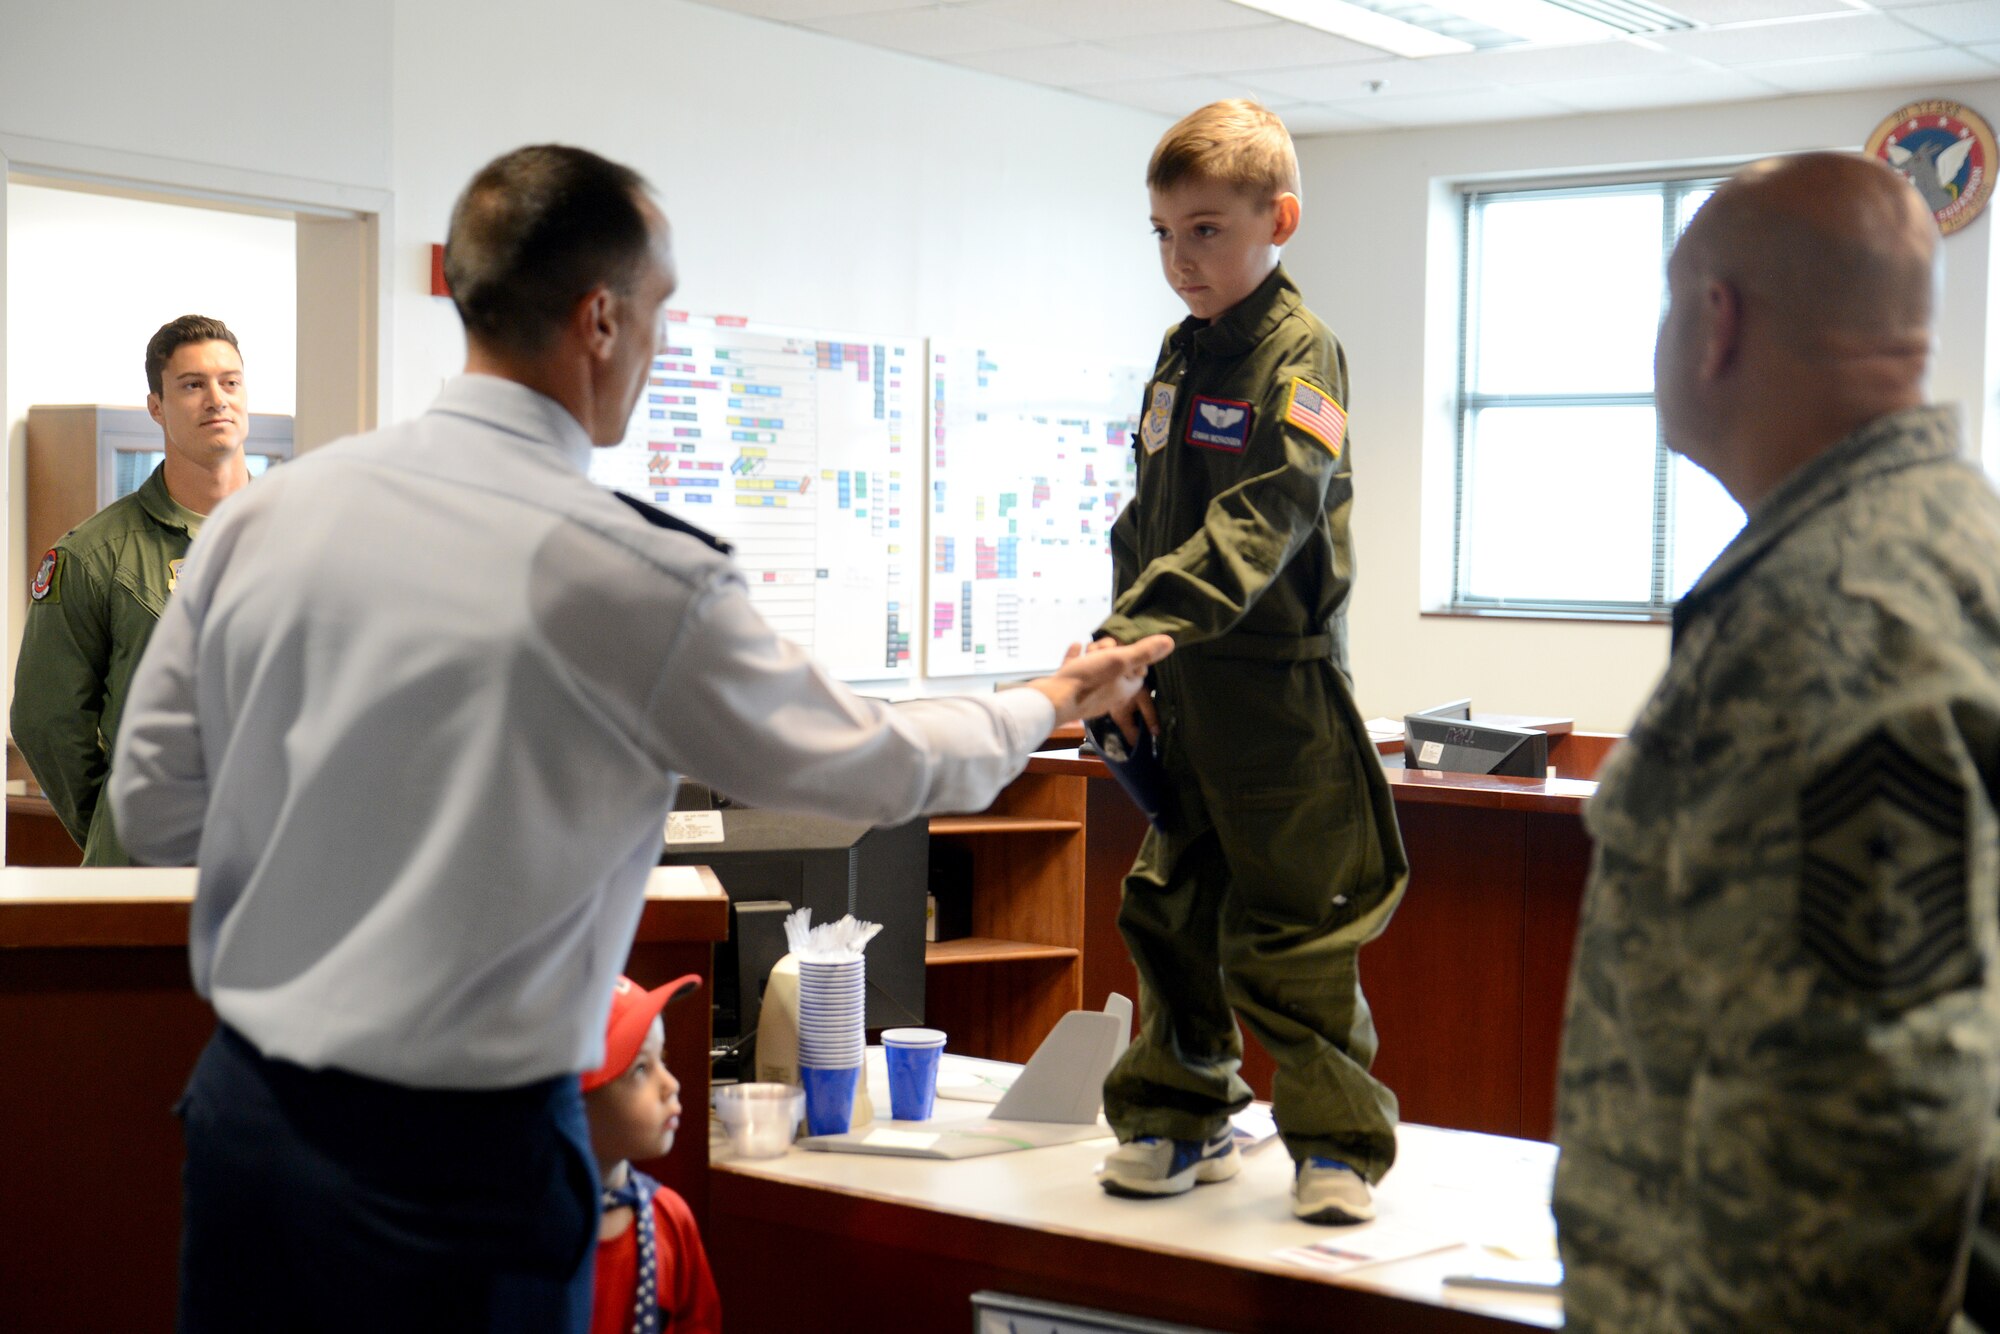 Ewan McFadgen, Pilot for a Day, receives a coin by Col. Leonard Kosinski, 62nd Airlift Wing commander, July 10, 2015, during his tour of Joint Base Lewis-McChord, Wash. McFadgen is Team McChord’s newest Pilot for a Day and received a tour of the base here. (U.S. Air Force photo/Airman 1st Class Keoni Chavarria)